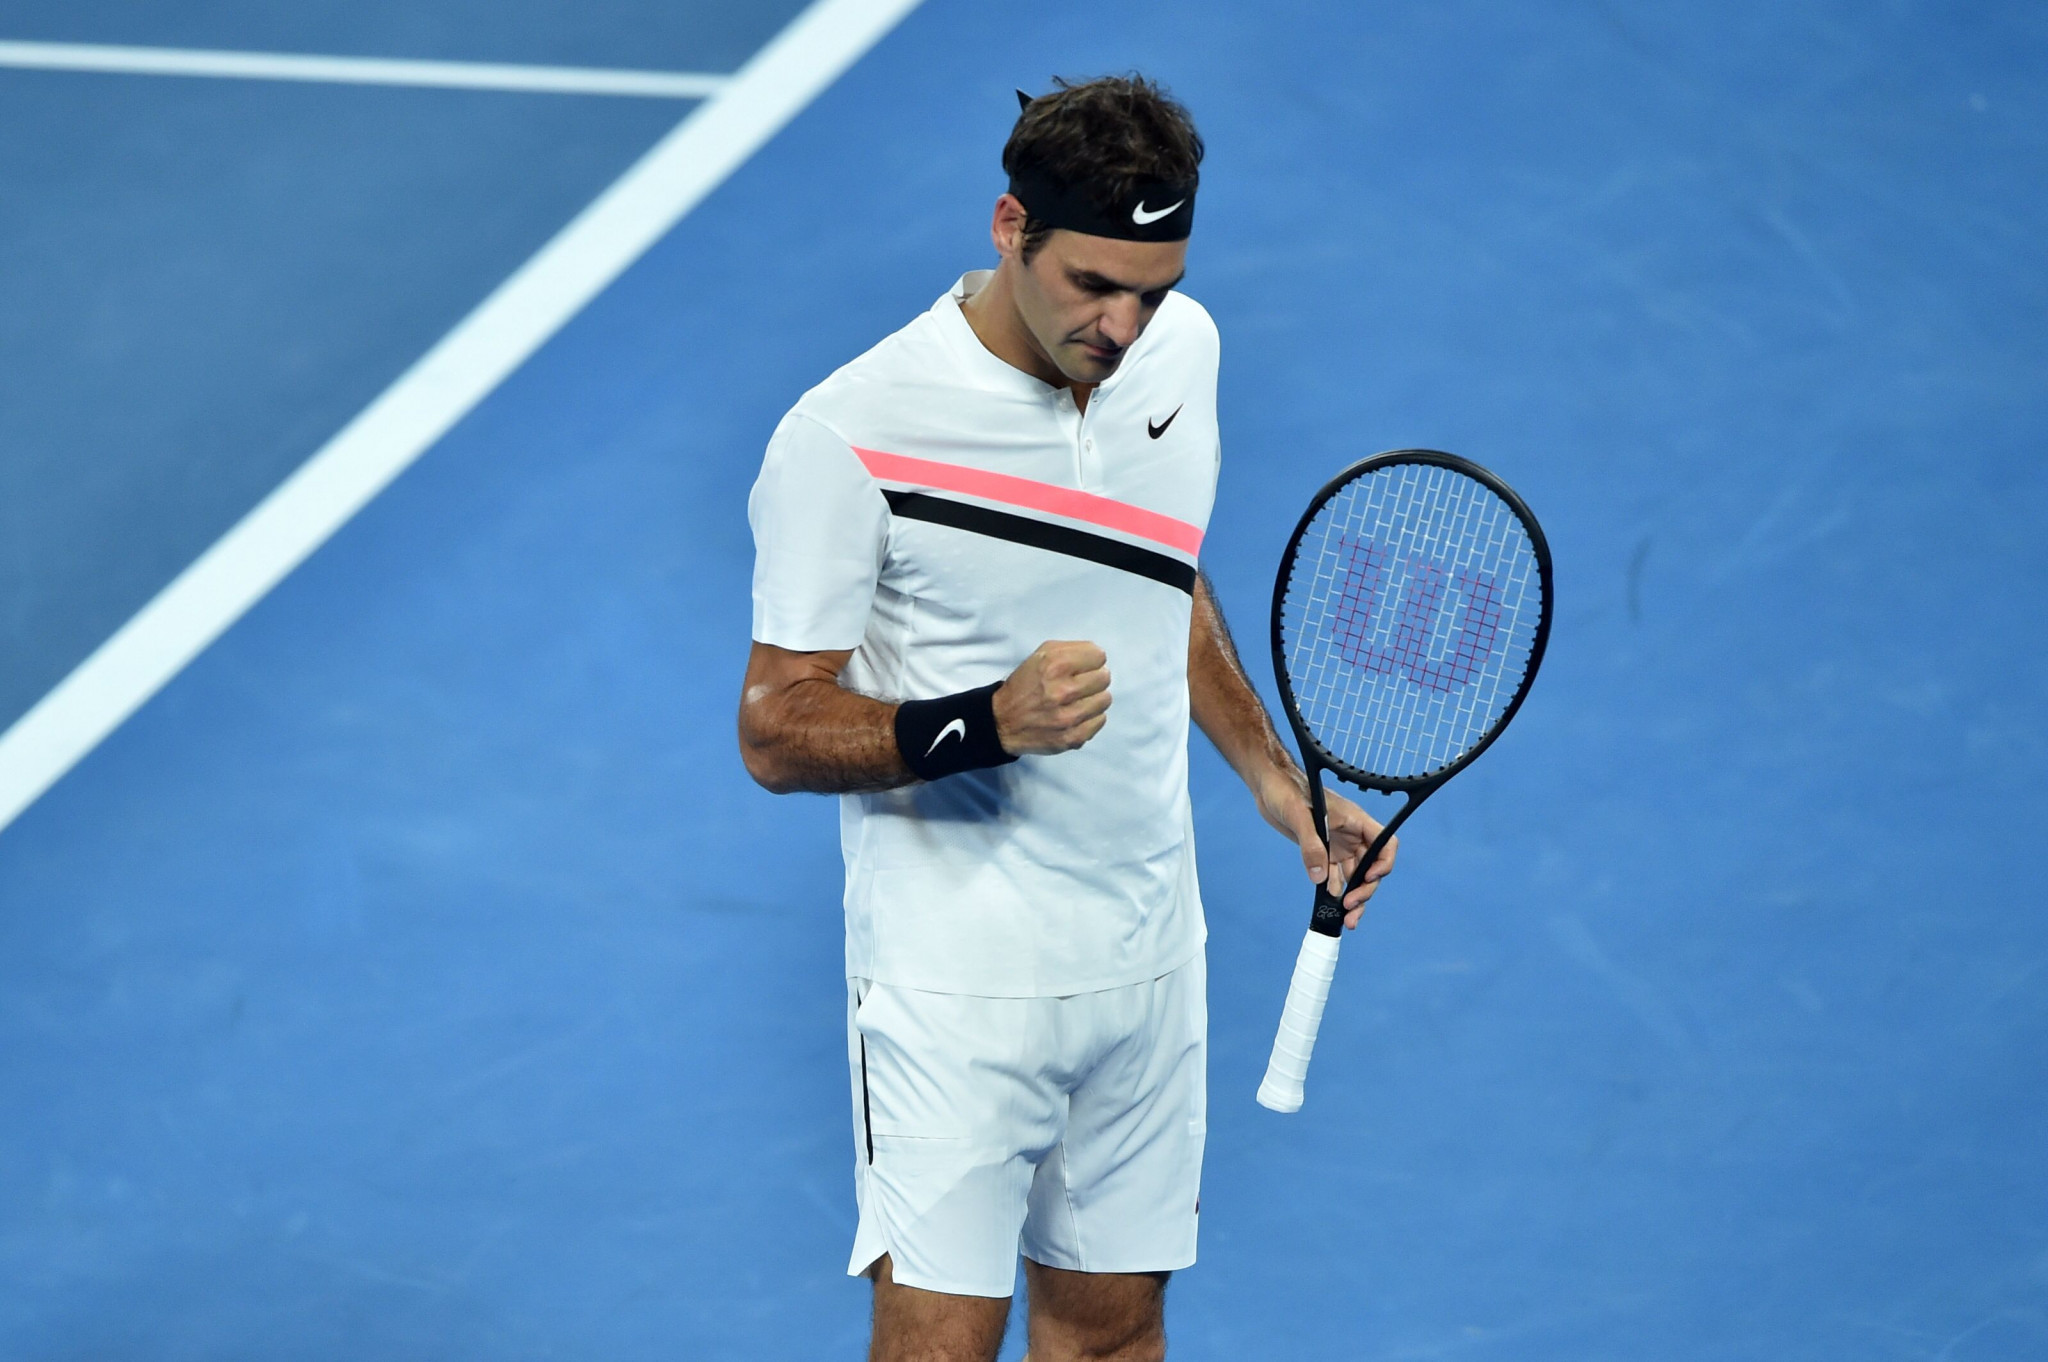 Federer reaches Australian Open final as Chung retires with injury